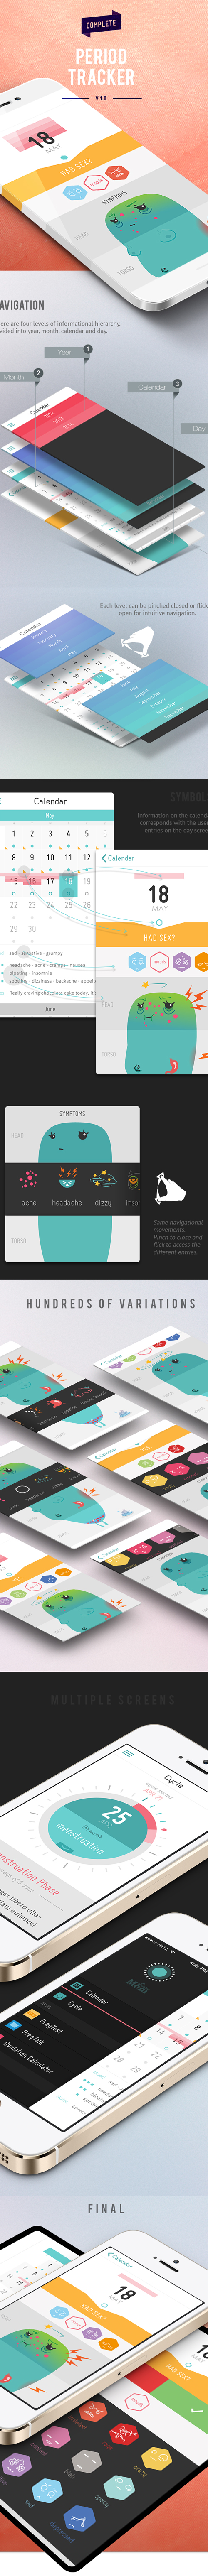 Amazing Mobile App UI Designs with Ultimate User Experience - 12